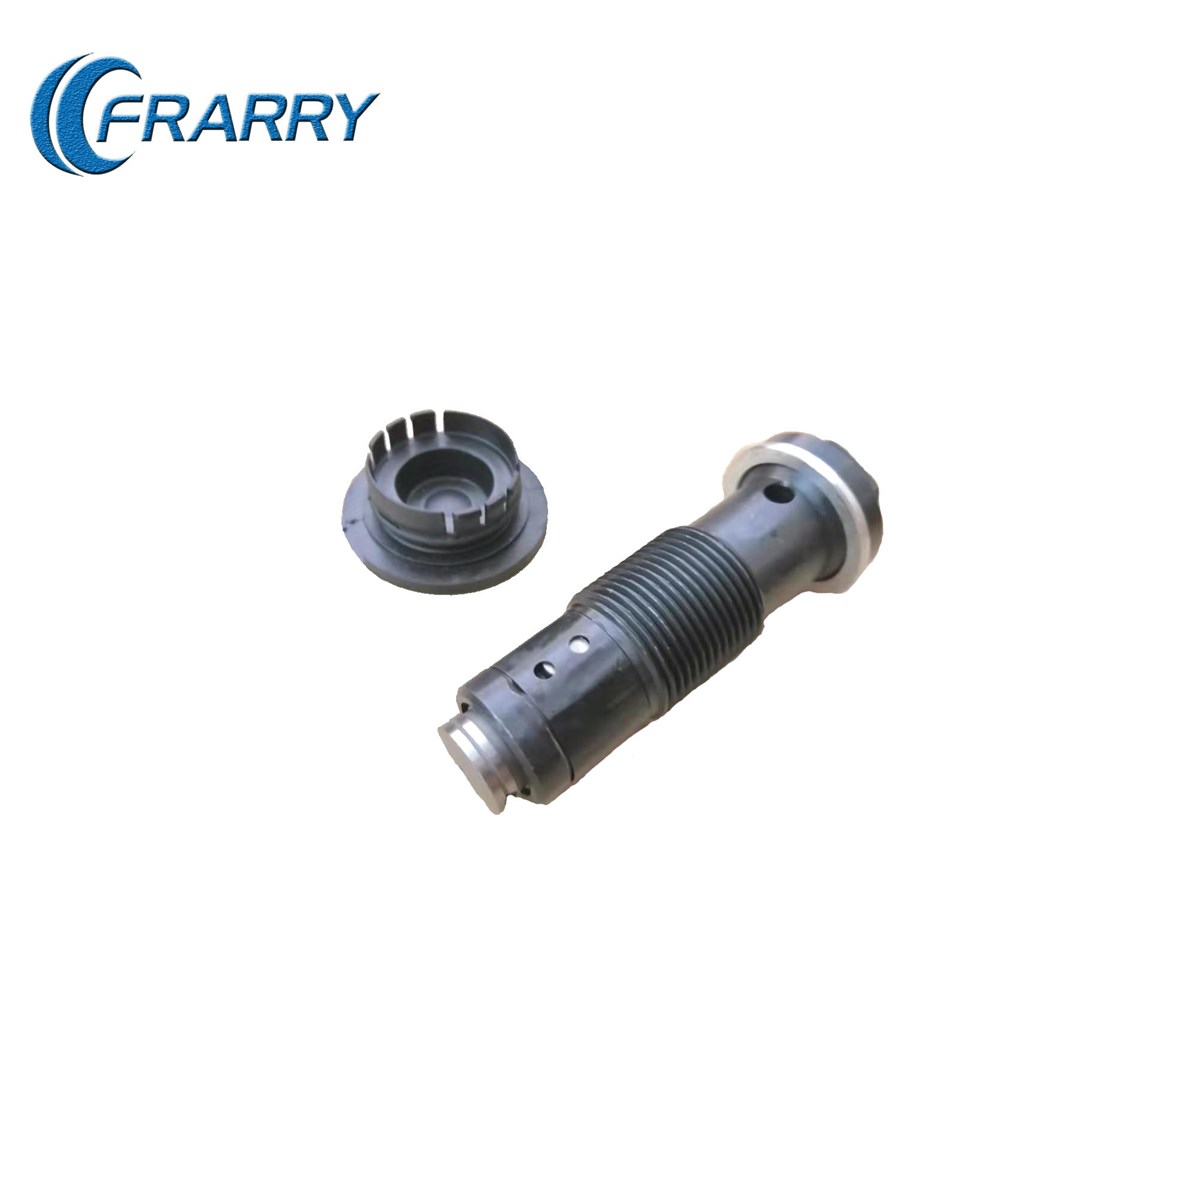 Engine Timing Chain Tensioner 2720500811 For W463 W203 CL203 S203 R230 W211 C209 S211 A209 W639 W906Frarry